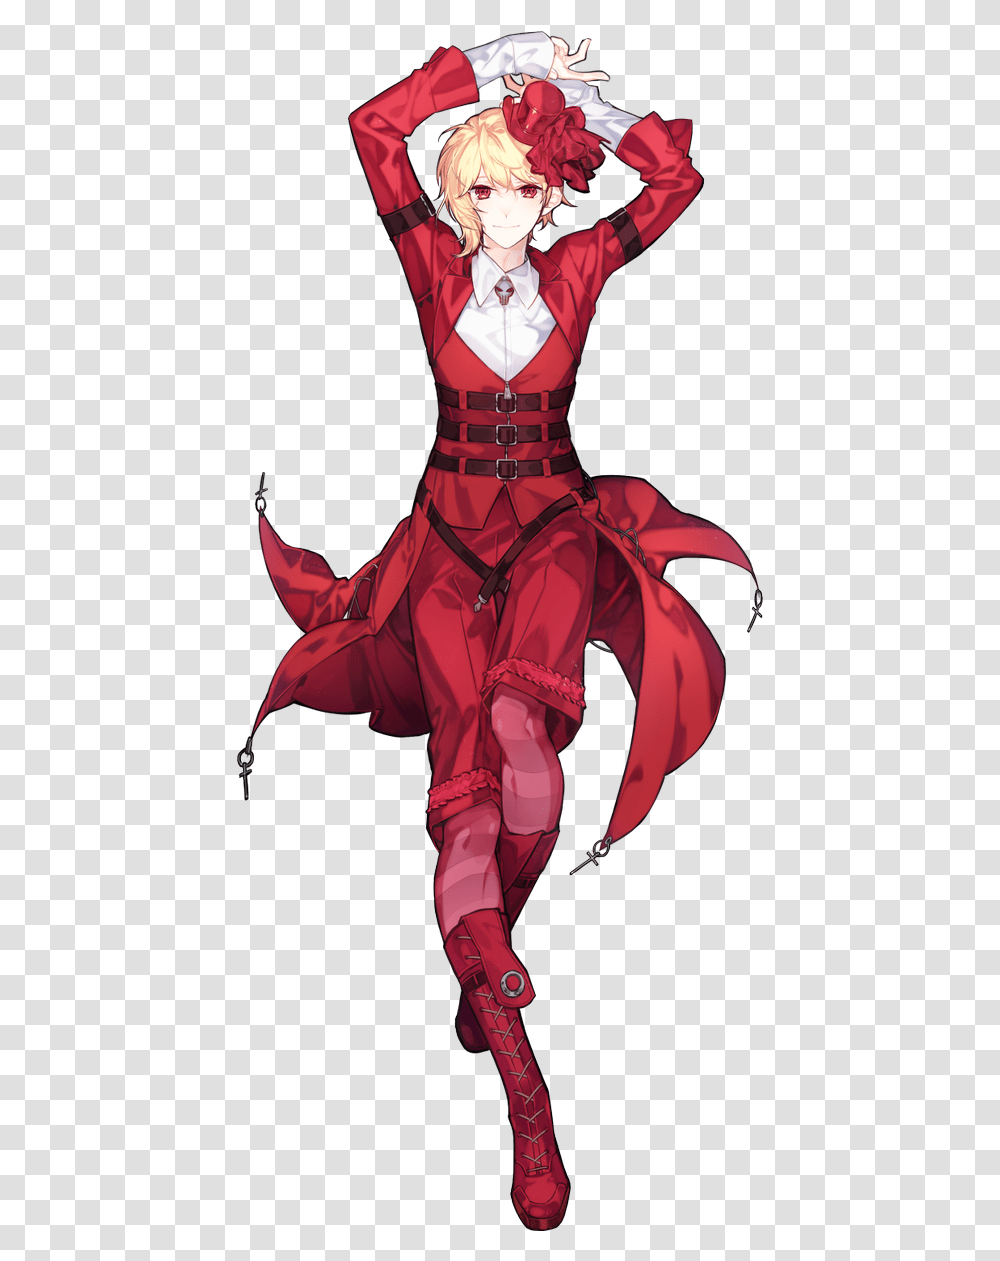 5261200 Anime Oc Guys Anime, Person, Costume, Clothing, Art Transparent Png